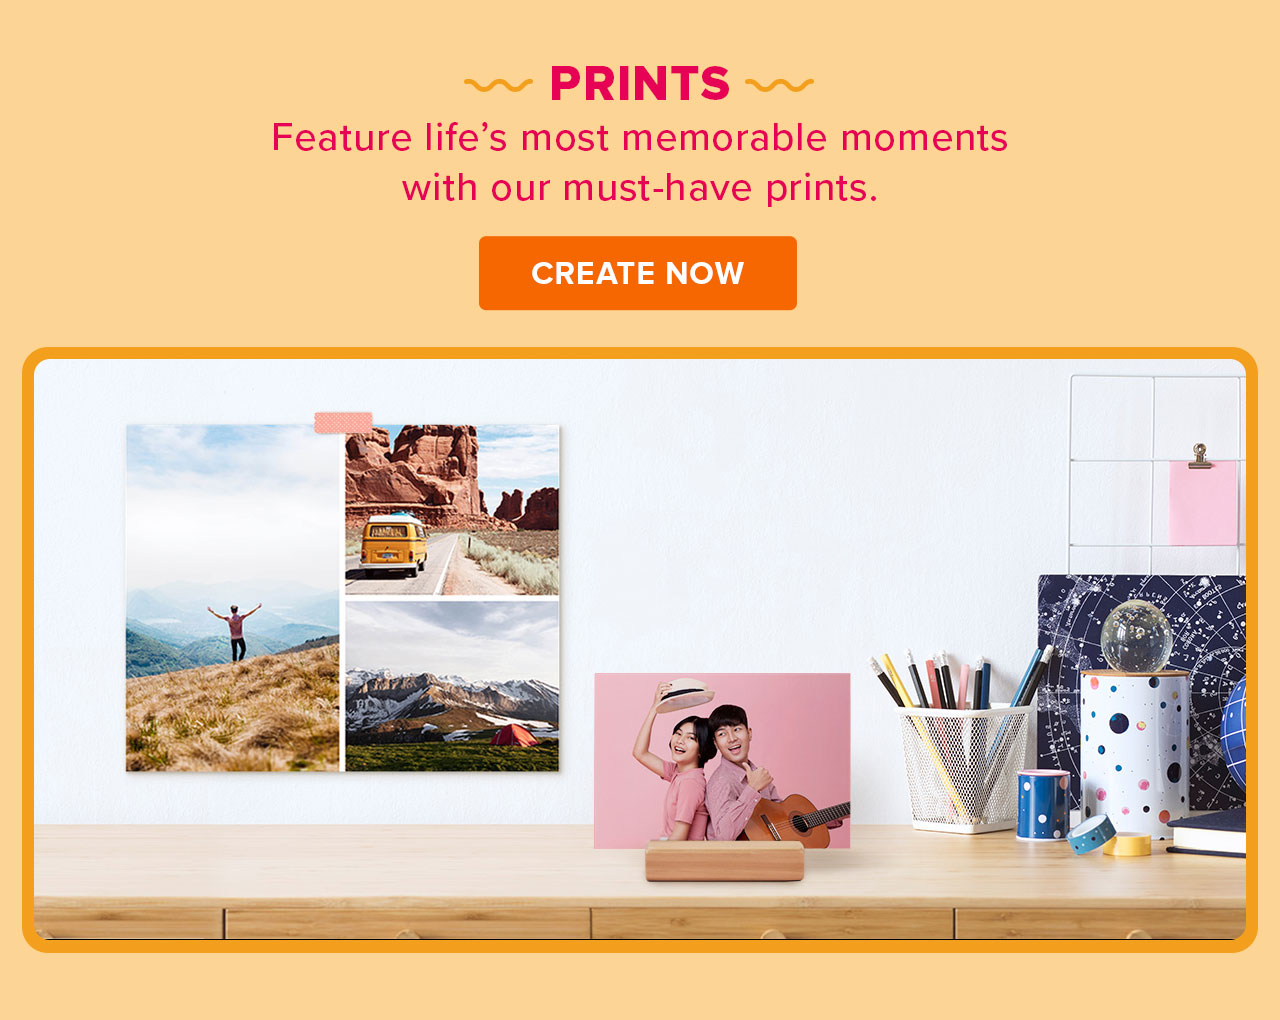  PRINTS Feature lifes most memorable moments with our must-have prints. CREATE NOW 